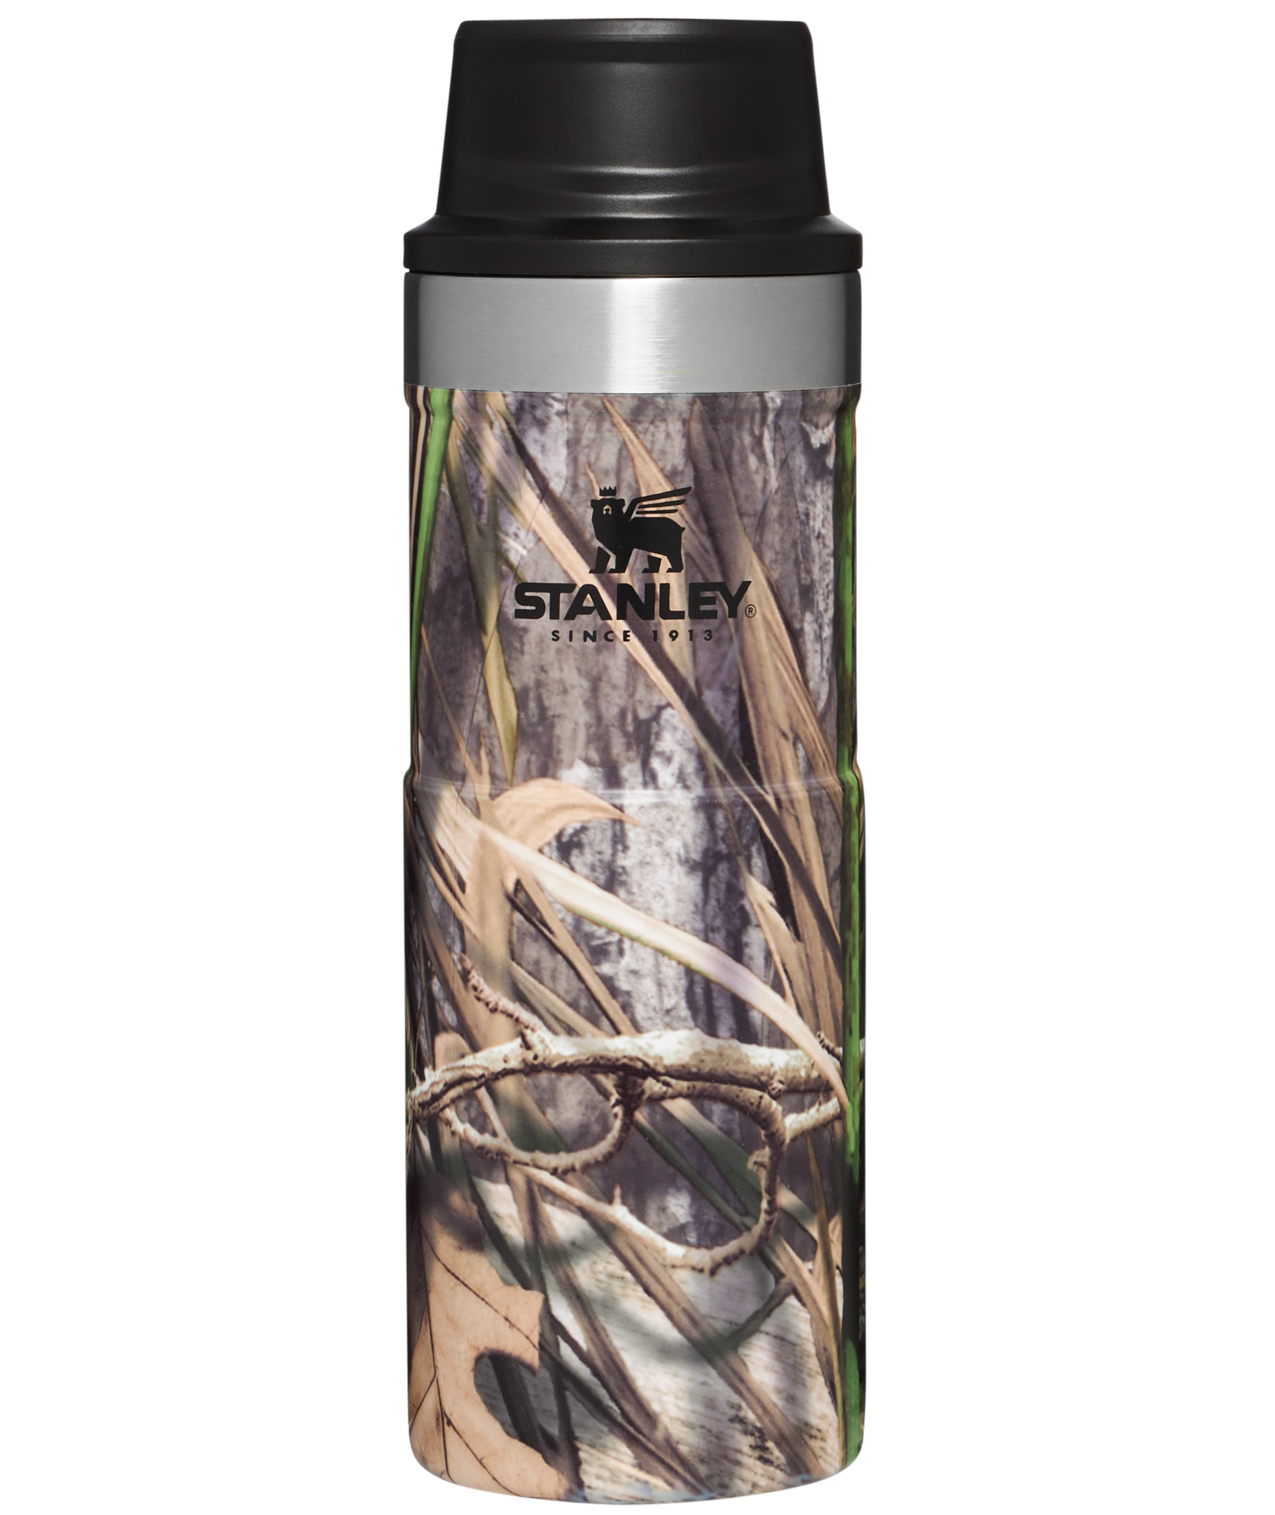 Designer camo is a vibe #stanley #charcoal #stanleycups #tumbler #desi